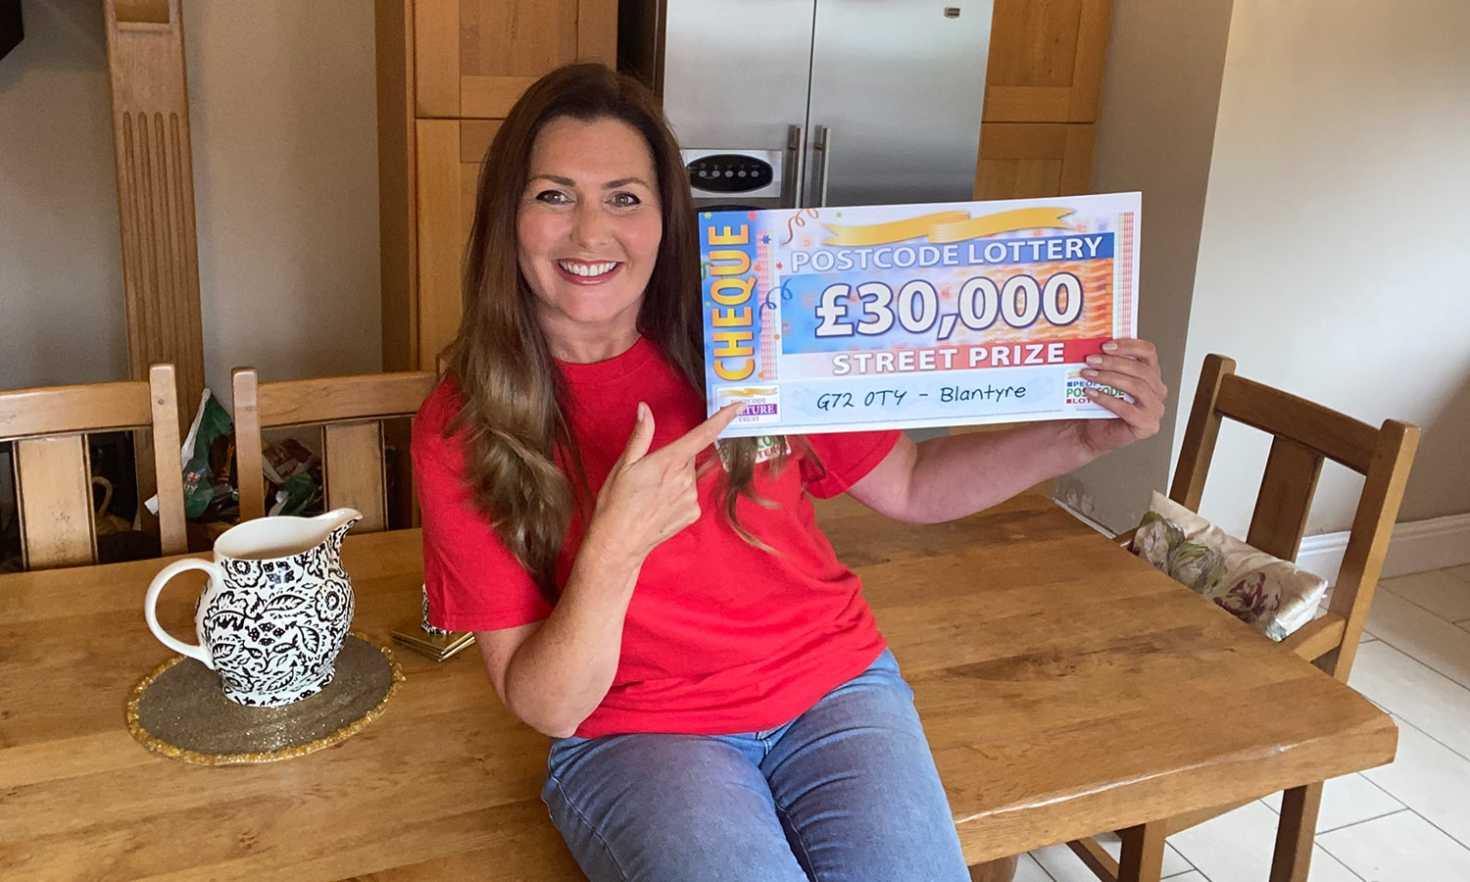 Today's £30,000 Street Prizes are heading to two lucky players in Blantyre